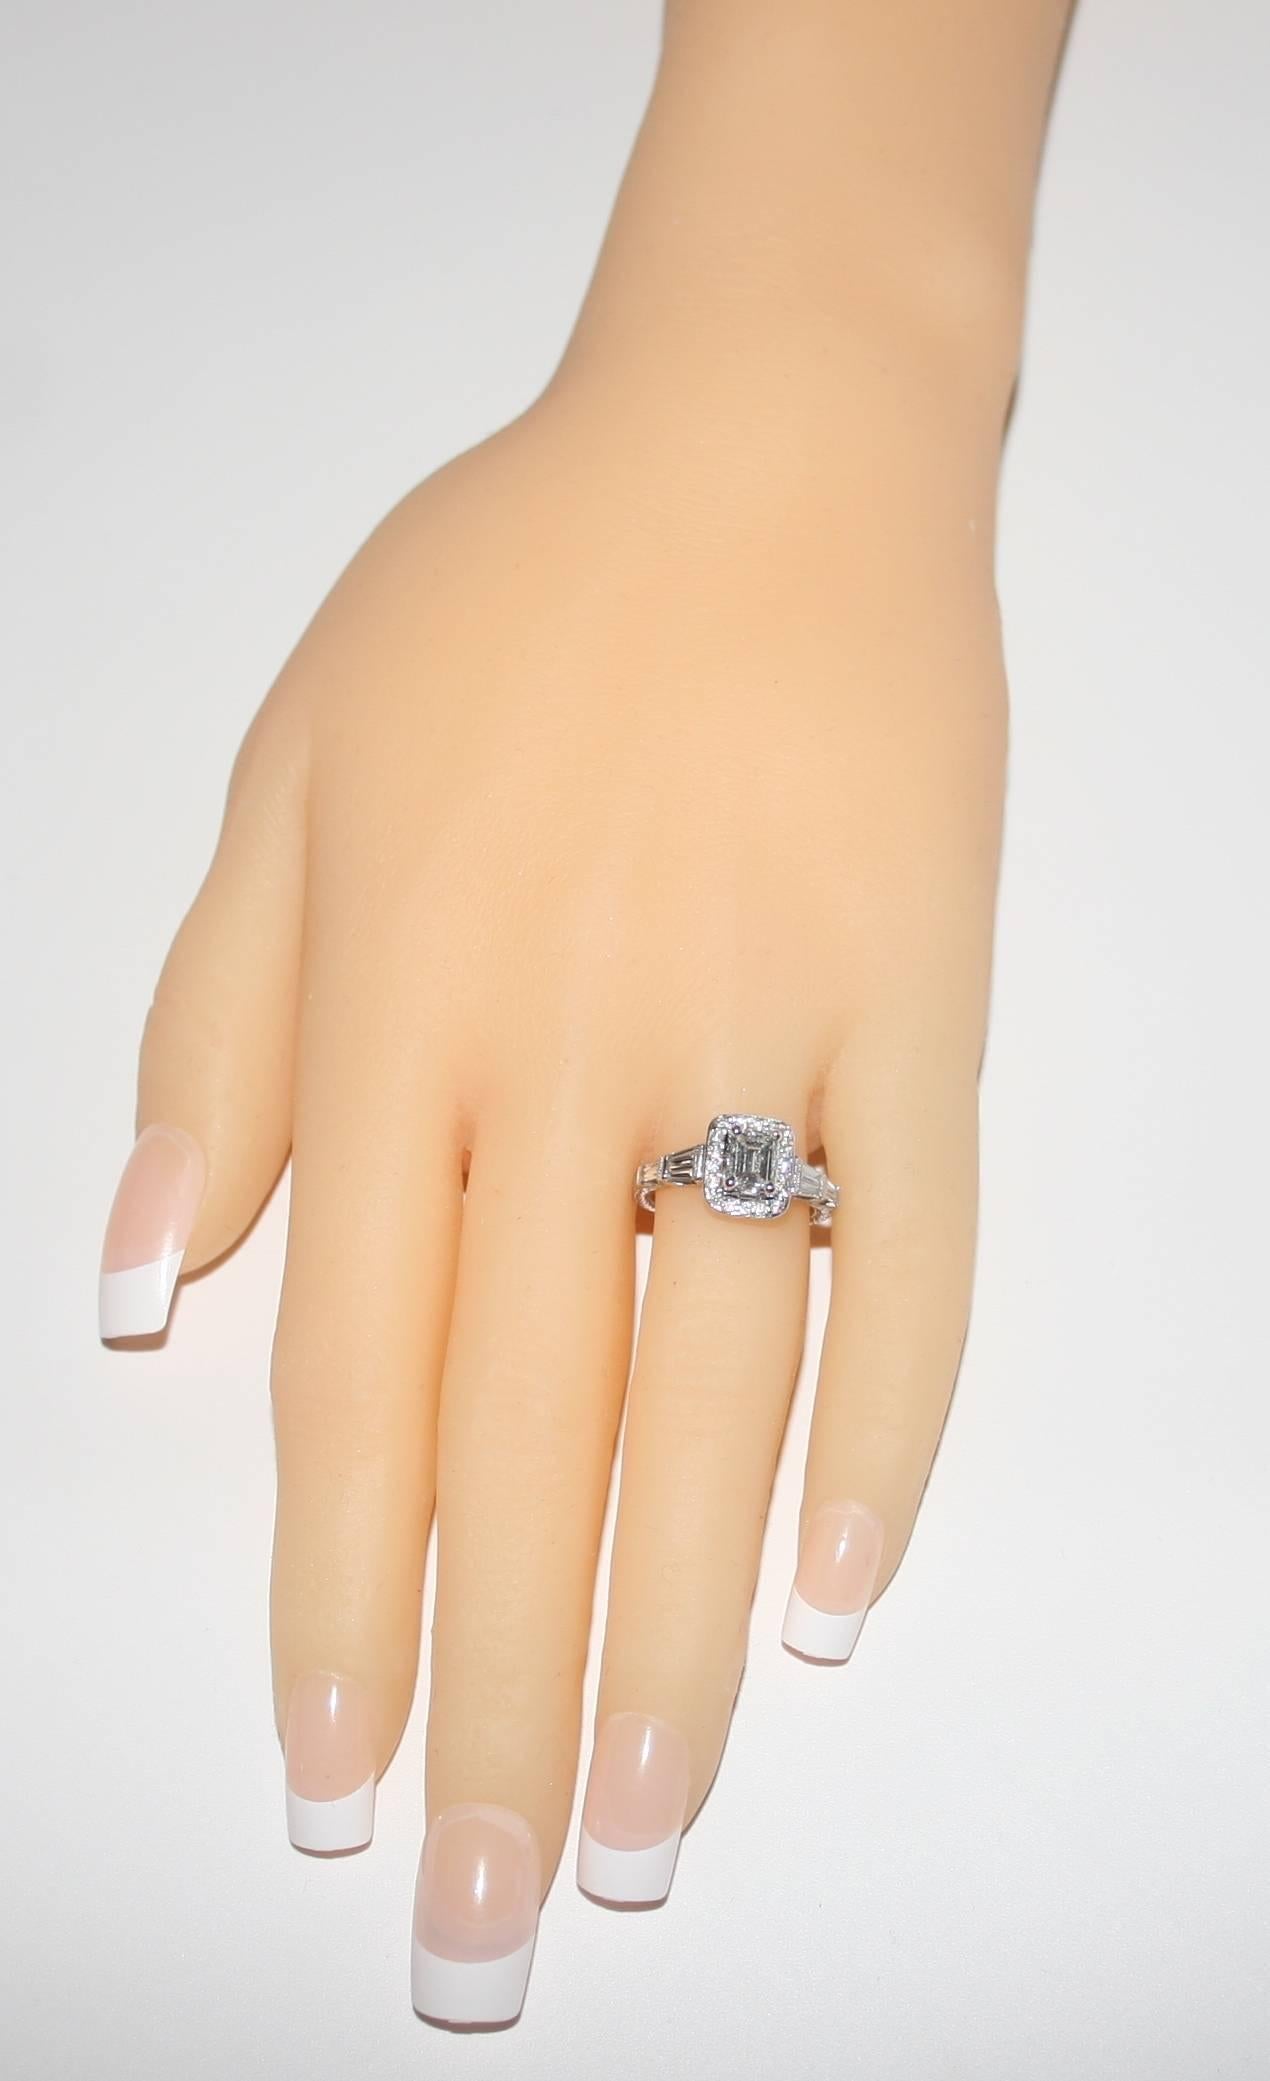 emerald-cut center stone with filigreed baguettes